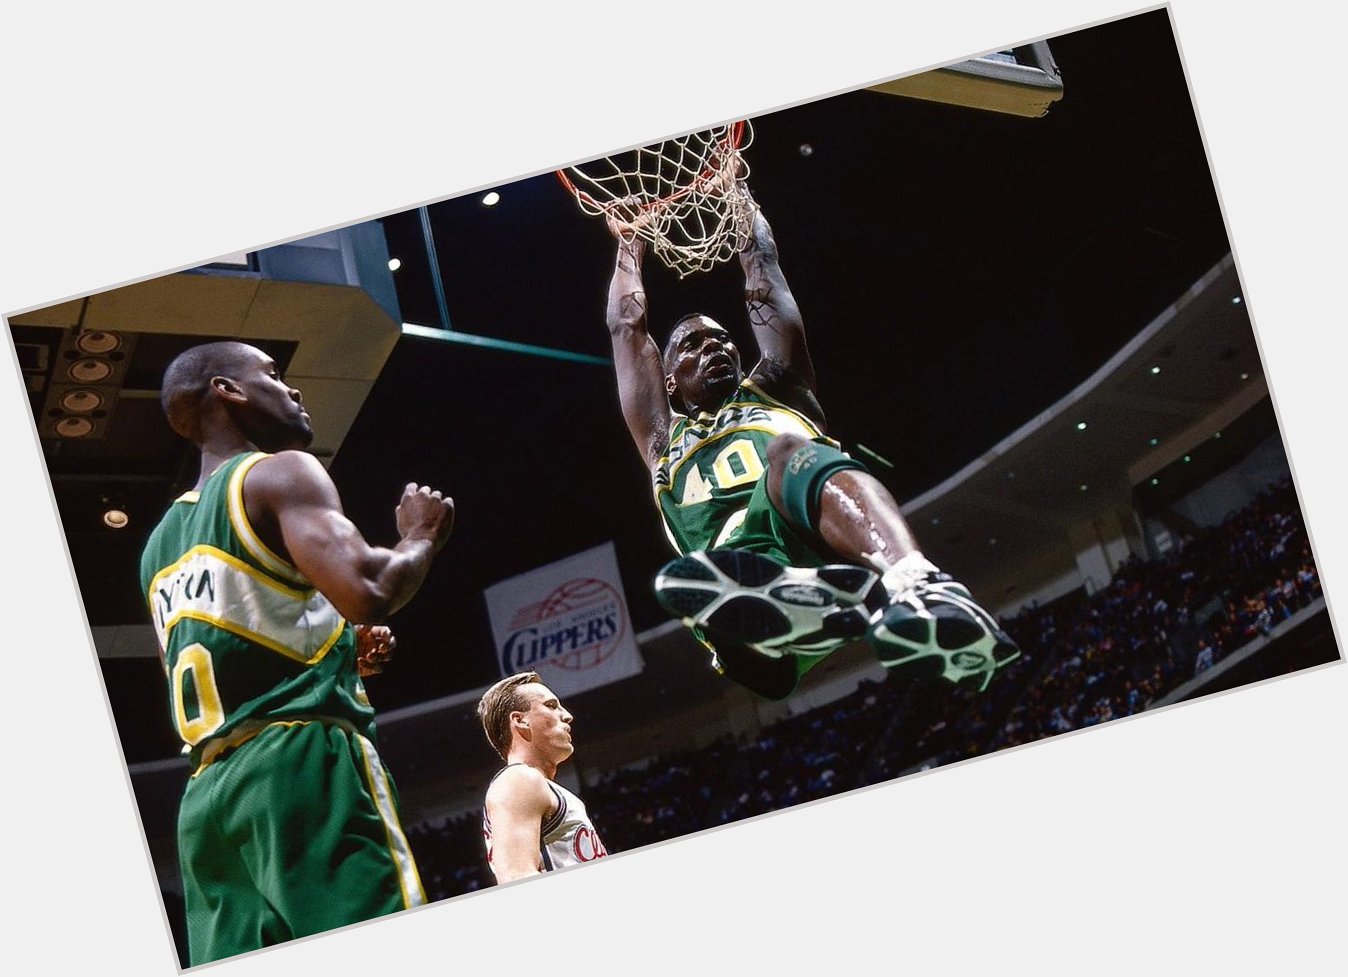 Happy 46th Birthday to ex-Sonics star and former Slam Dunk champion MORE:  